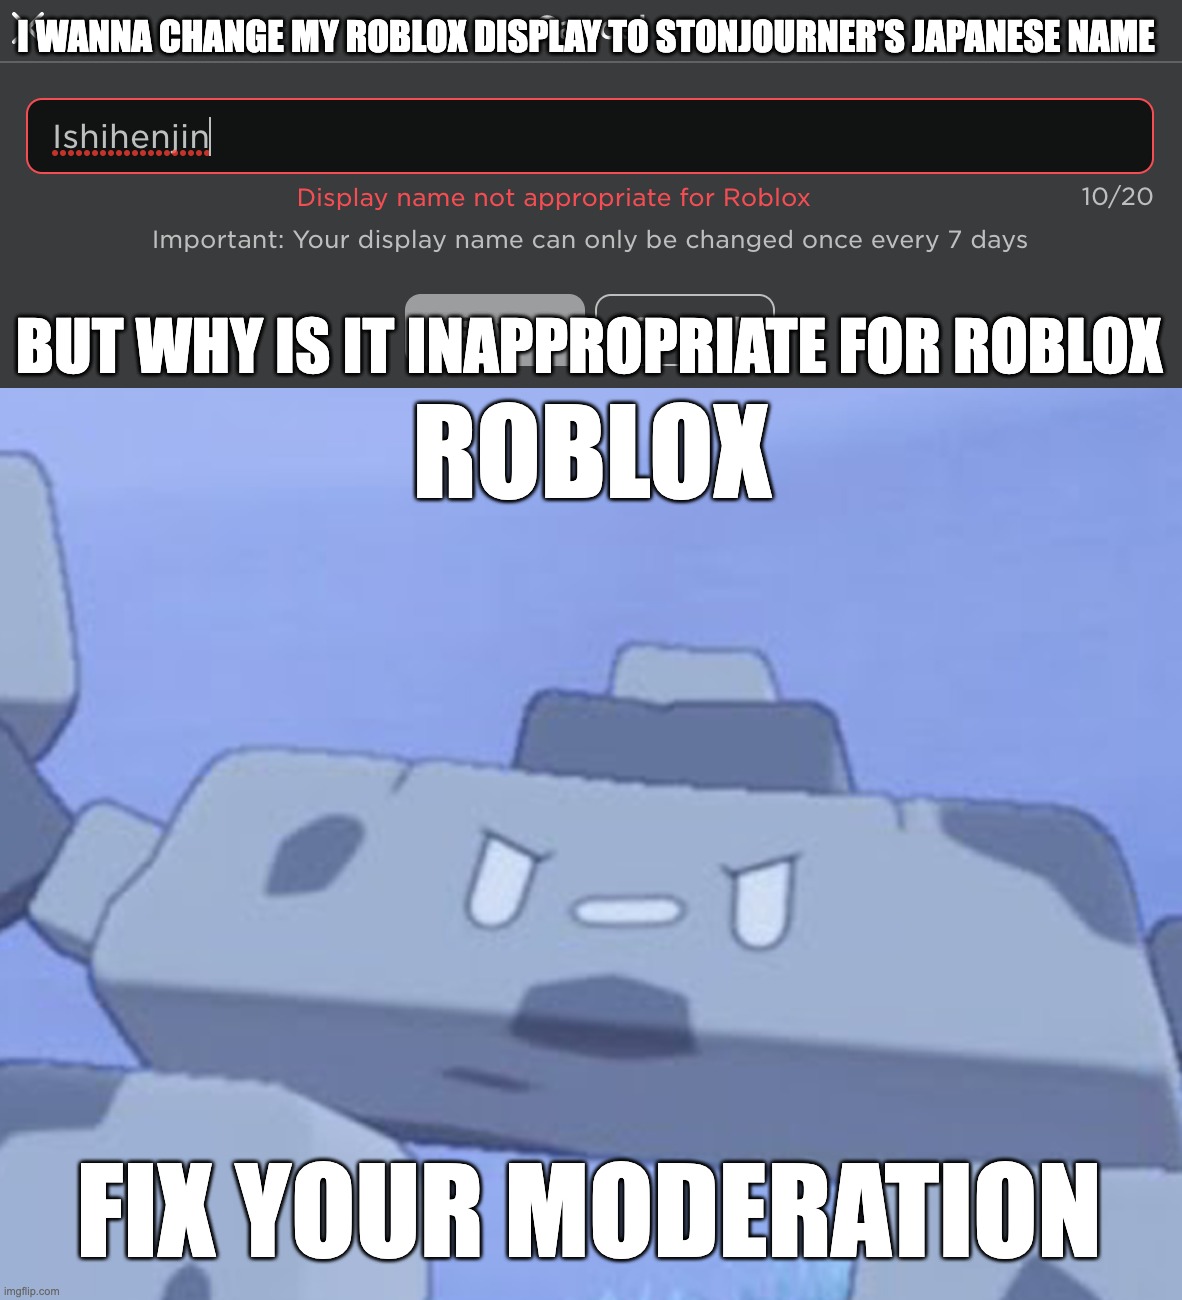 roblox, fix your moderation. | I WANNA CHANGE MY ROBLOX DISPLAY TO STONJOURNER'S JAPANESE NAME; BUT WHY IS IT INAPPROPRIATE FOR ROBLOX; ROBLOX; FIX YOUR MODERATION | image tagged in roblox,moderators,moderation system,stonjourner | made w/ Imgflip meme maker